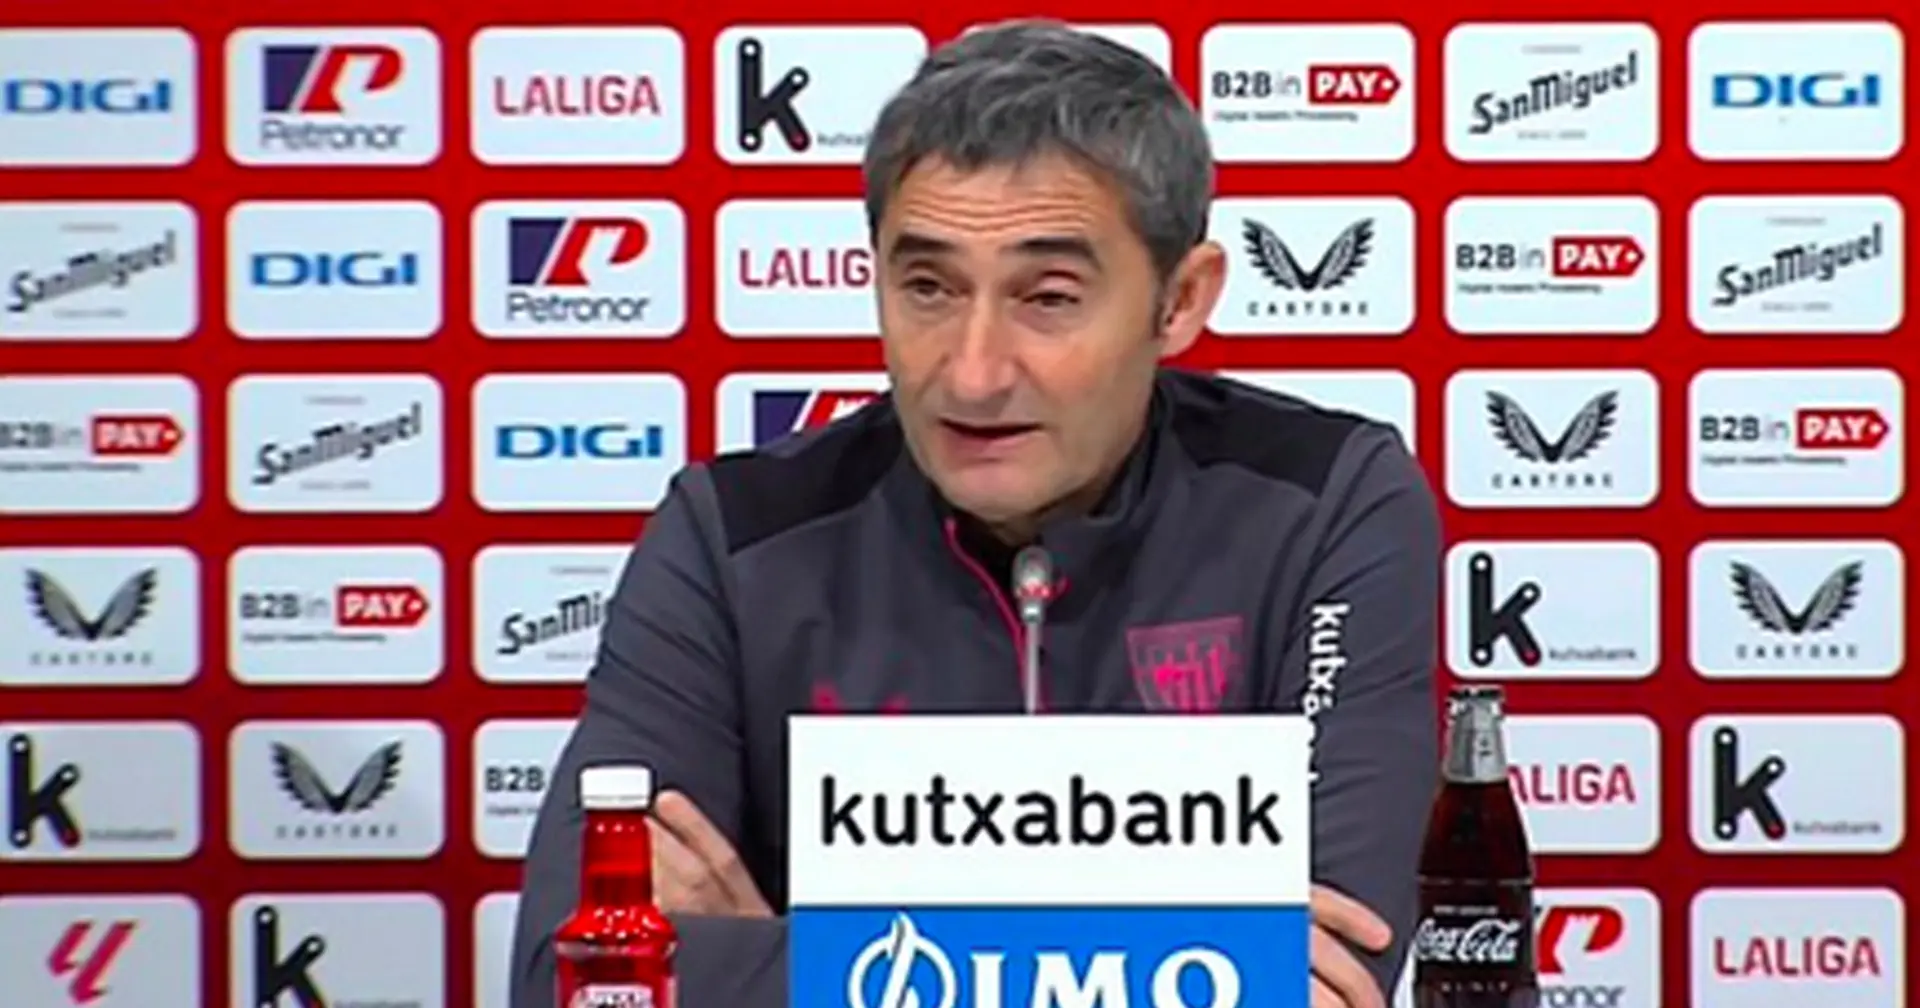 'We are lucky': Ernesto Valverde reacts to drawing Barca in Copa del Rey